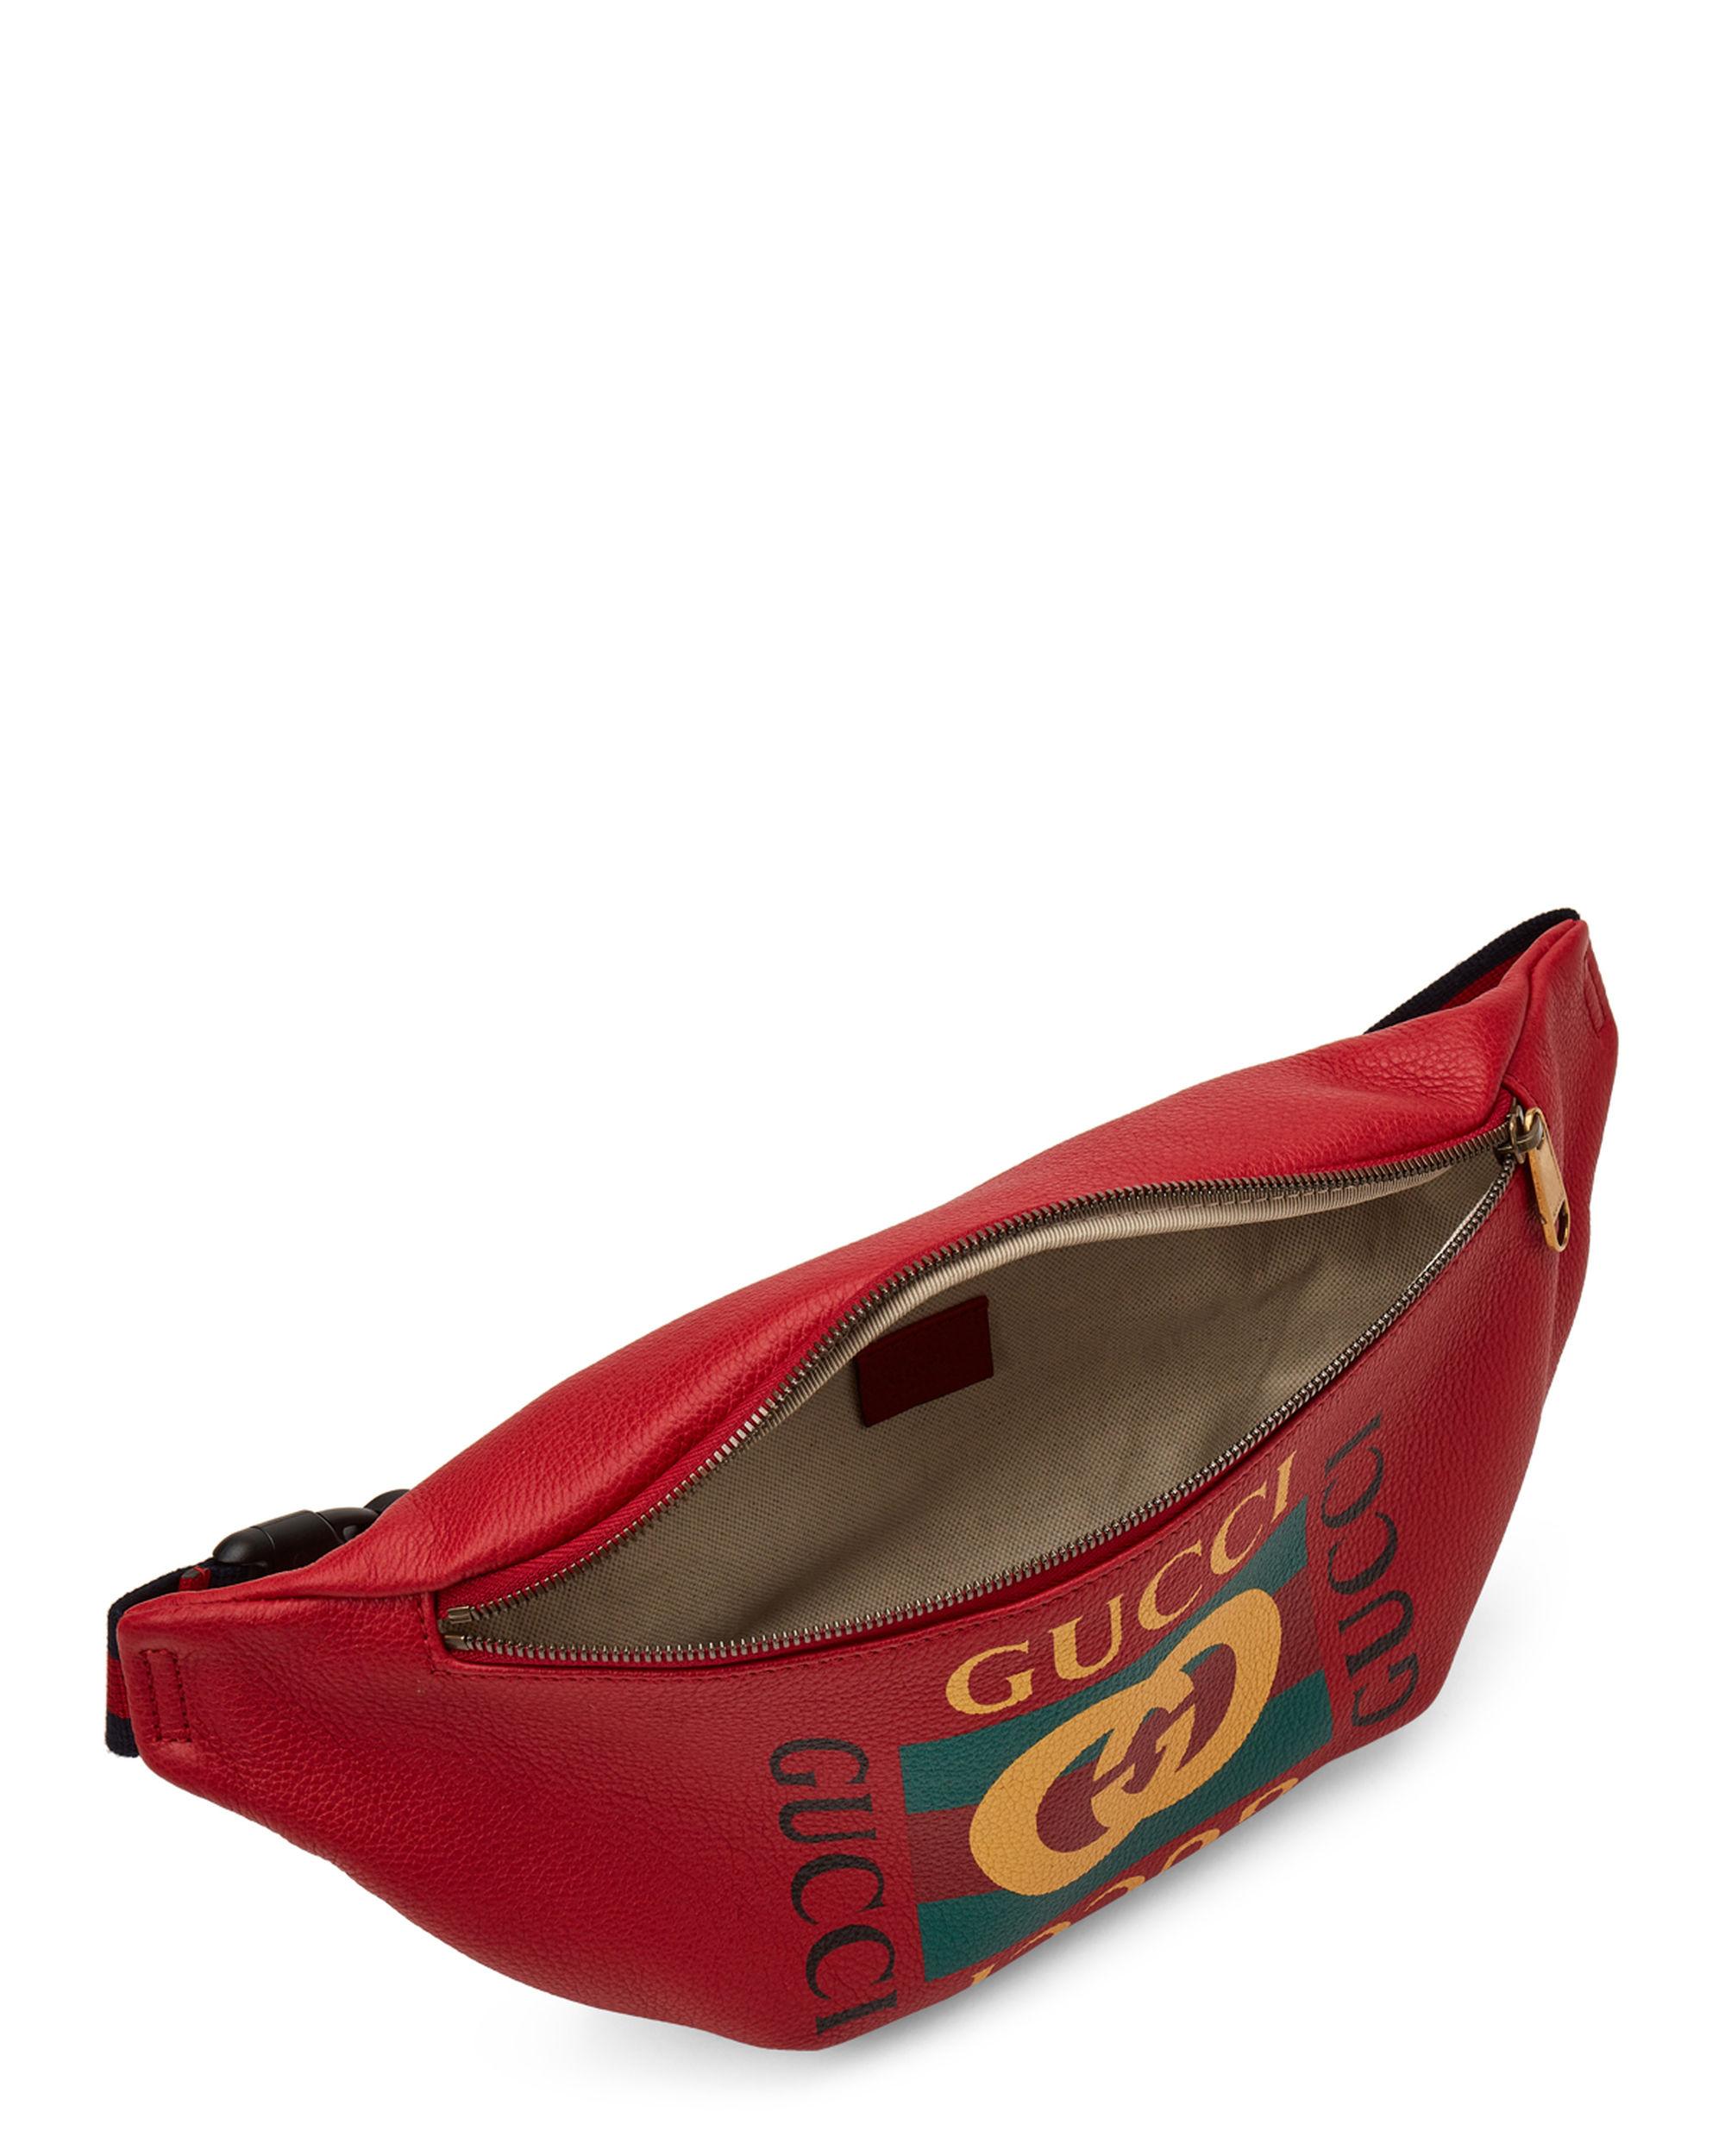 Gucci Hibiscus Print Leather Fanny Pack in Red - Lyst